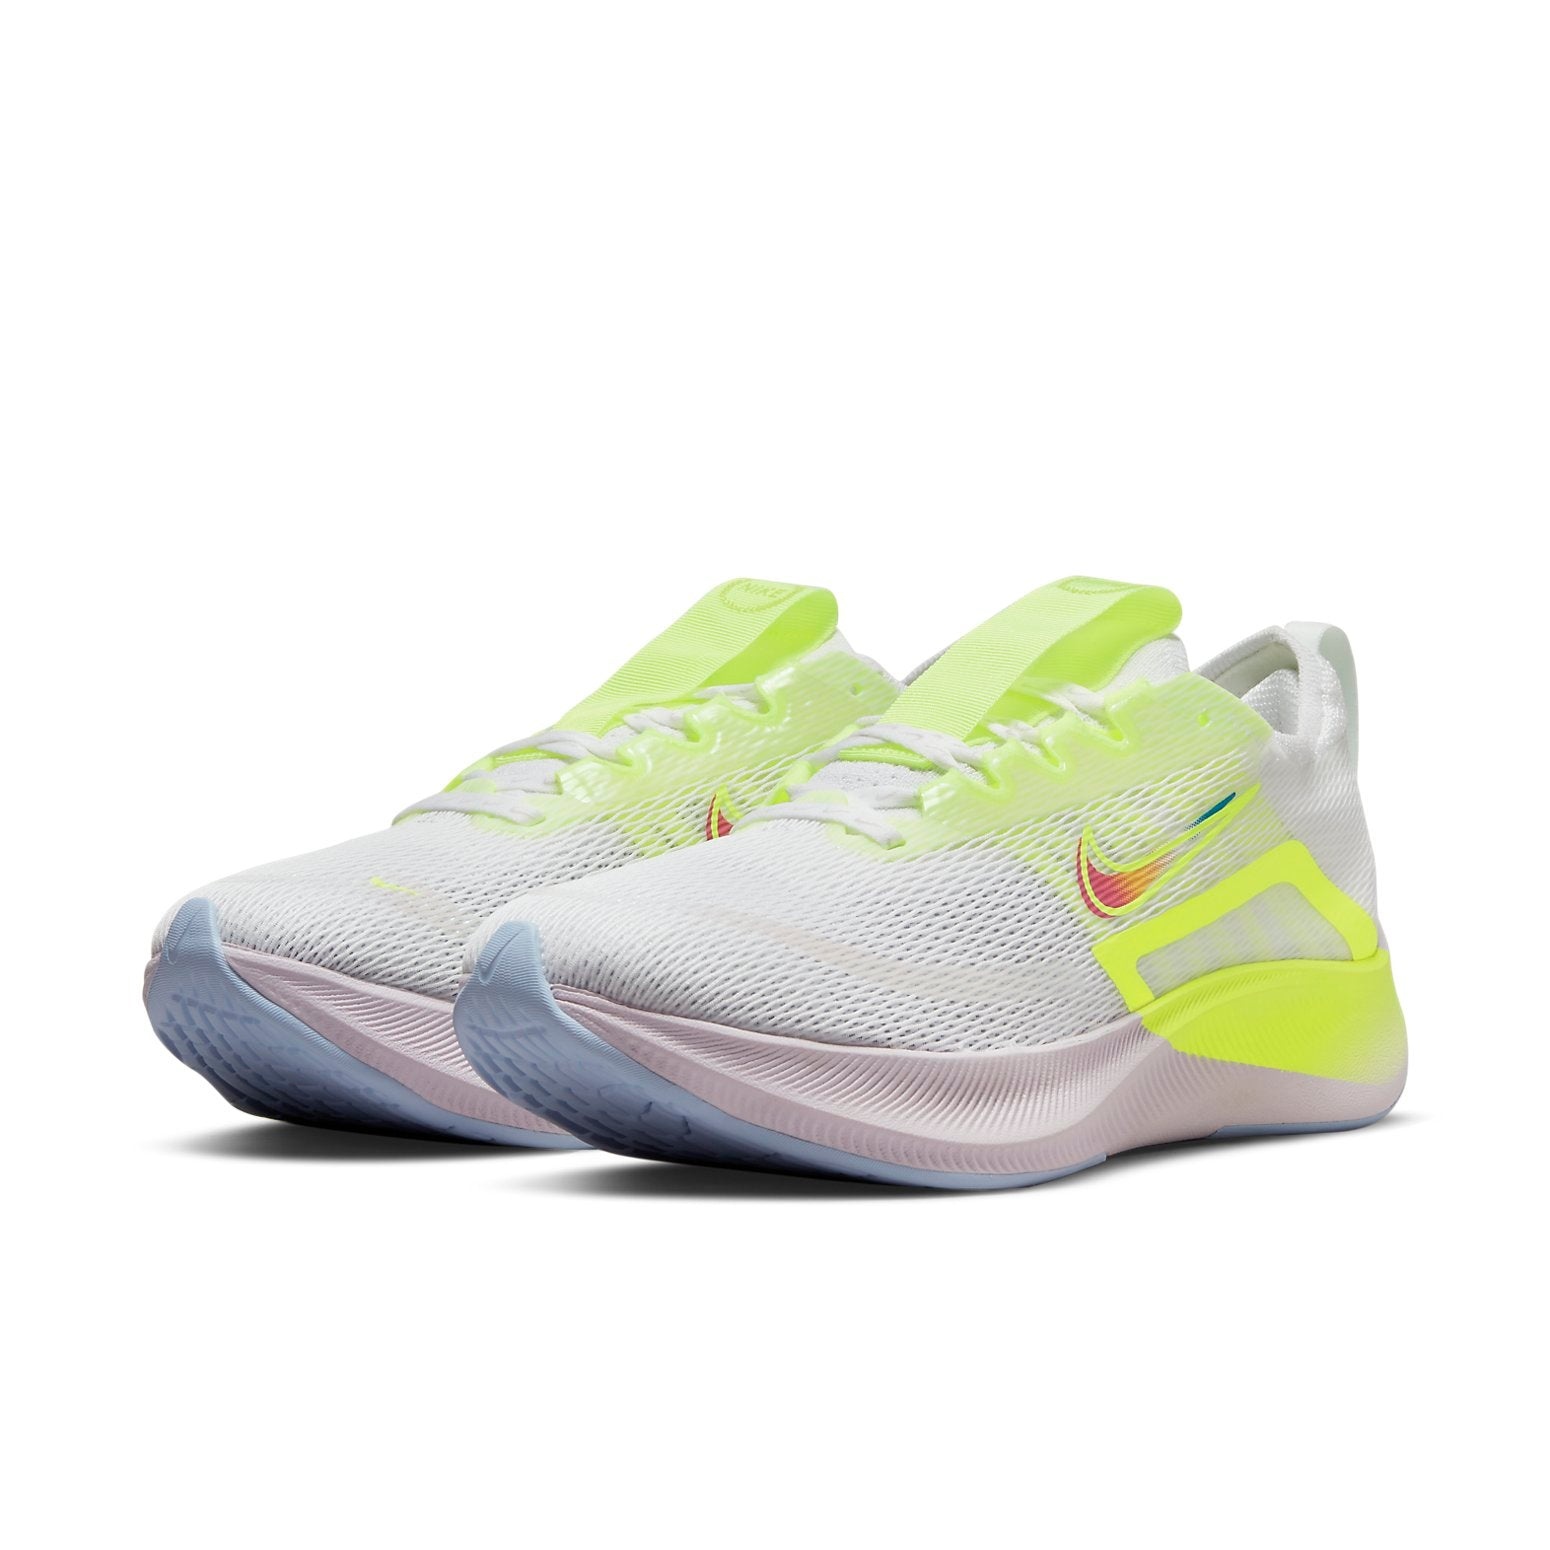 (WMNS) Nike Zoom Fly 4 Premium 'White Barely Green' DN2658-101 - 3